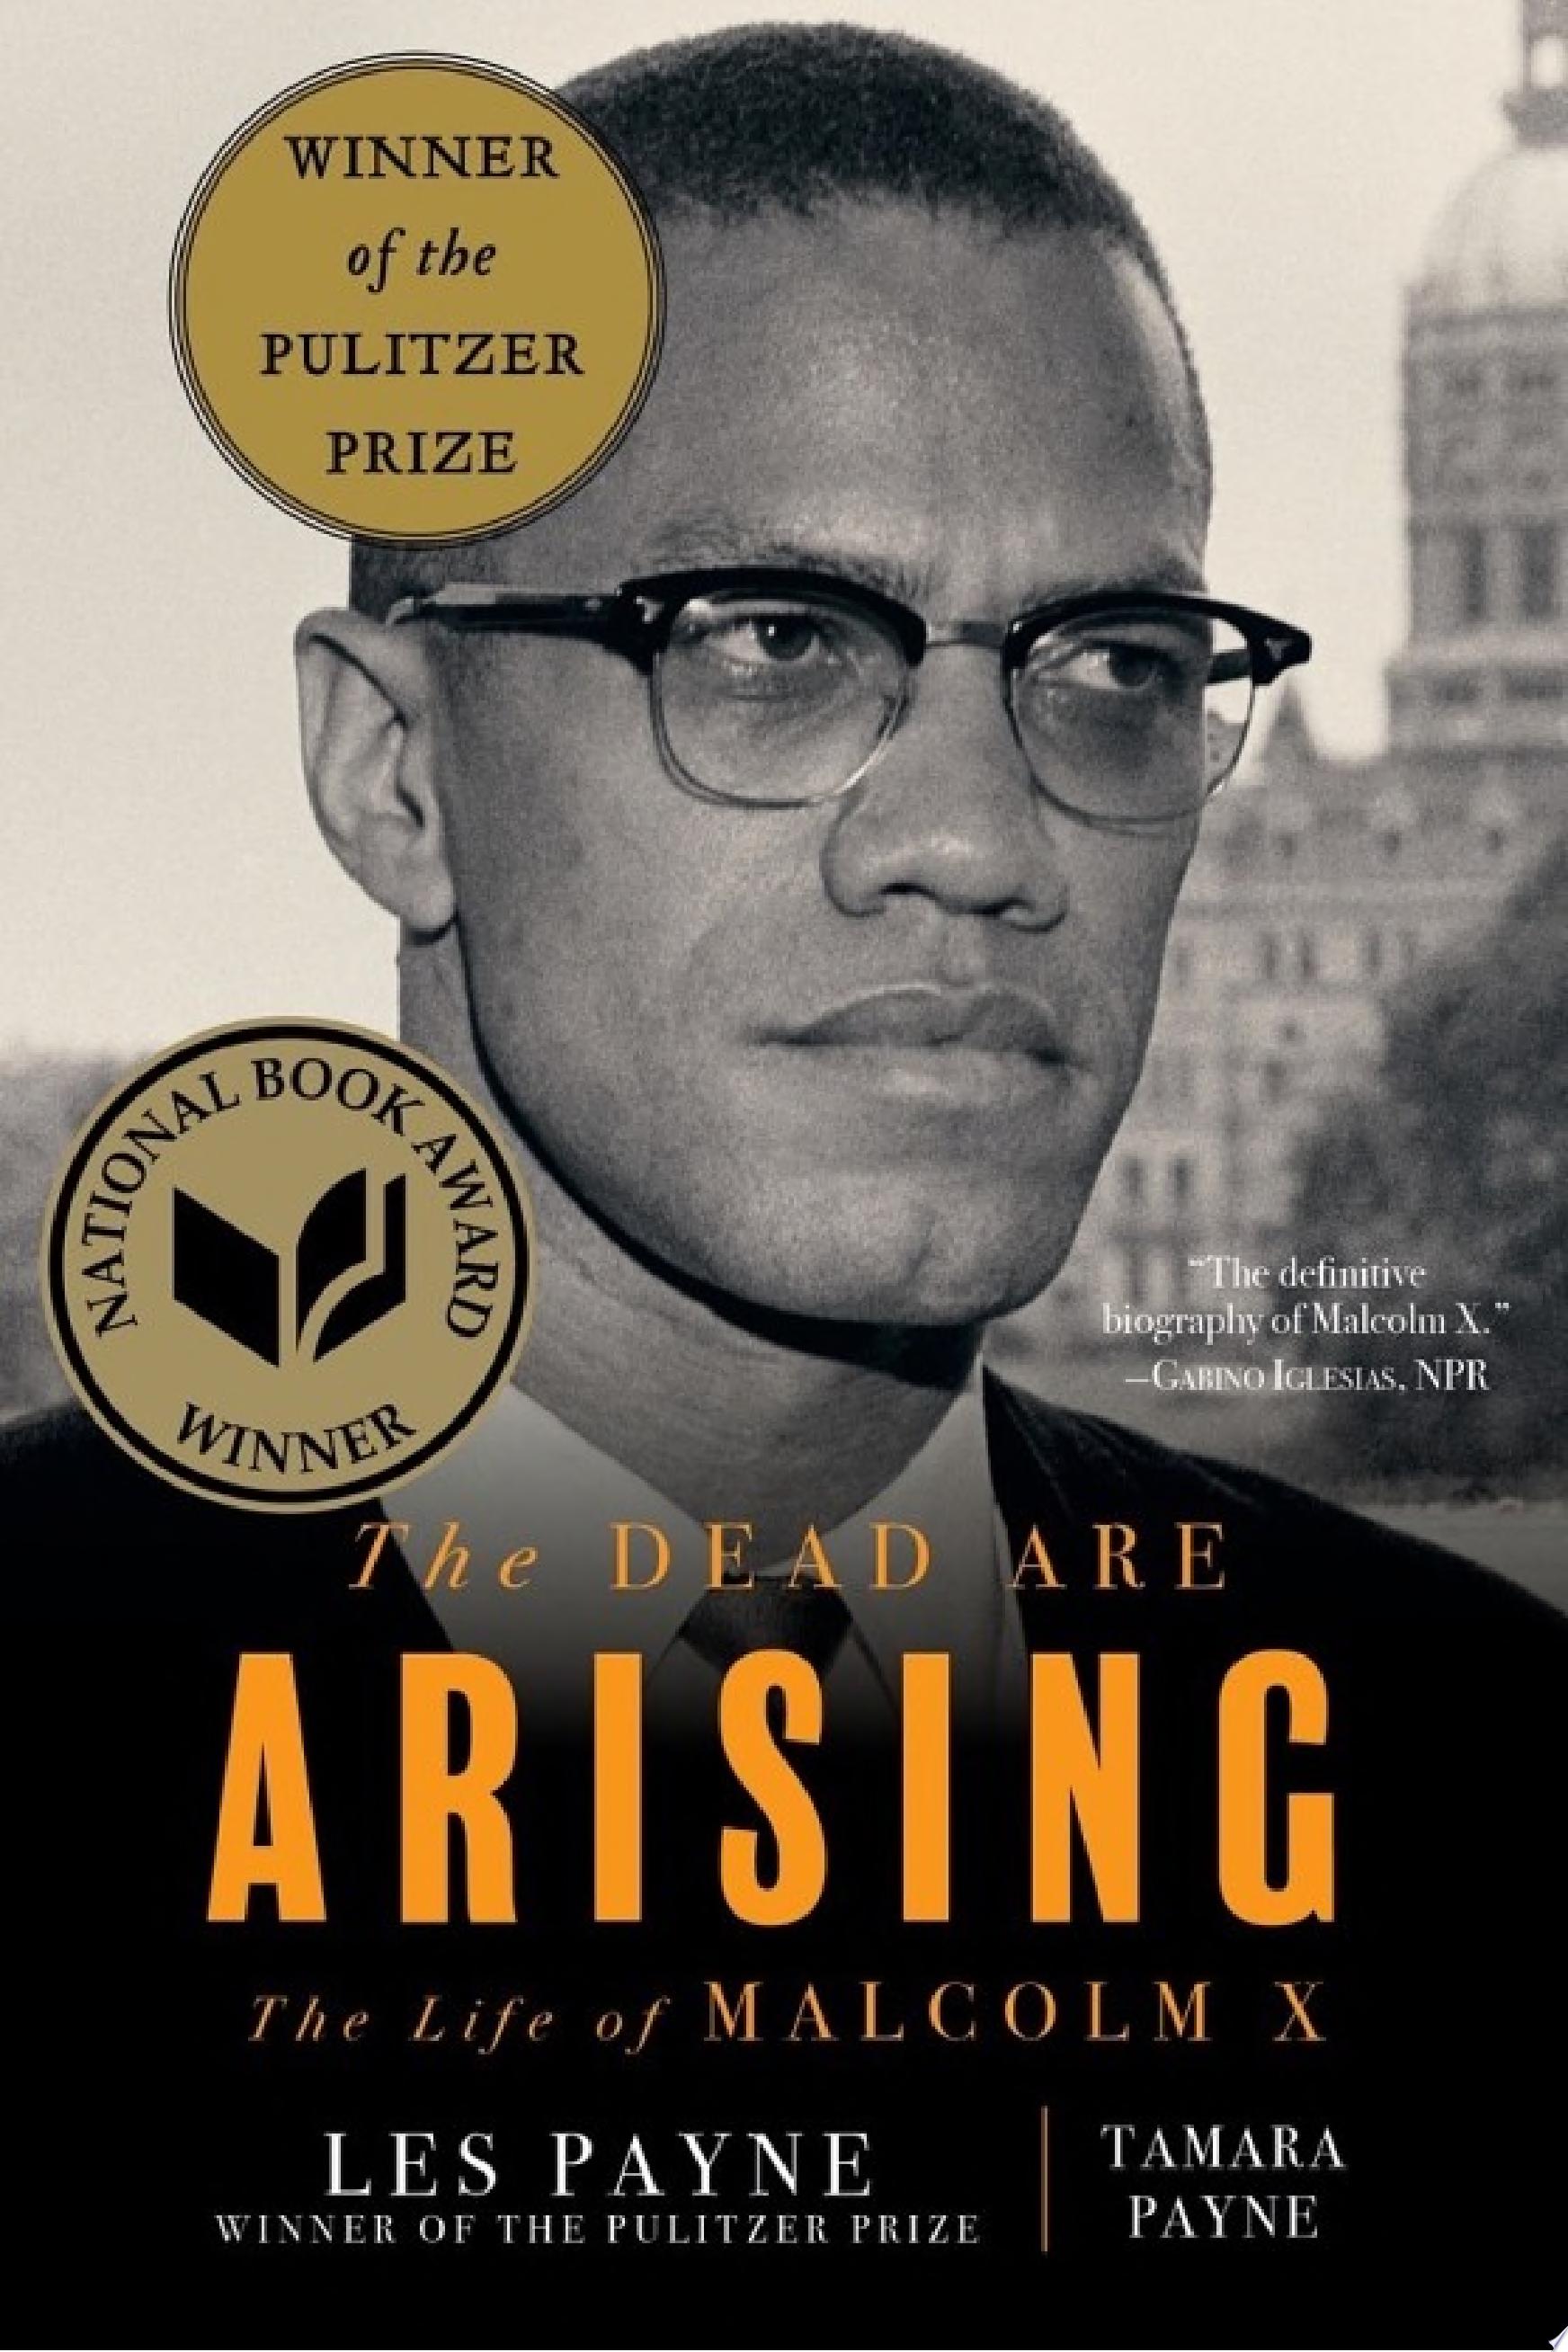 Image for "The Dead Are Arising: The Life of Malcolm X"